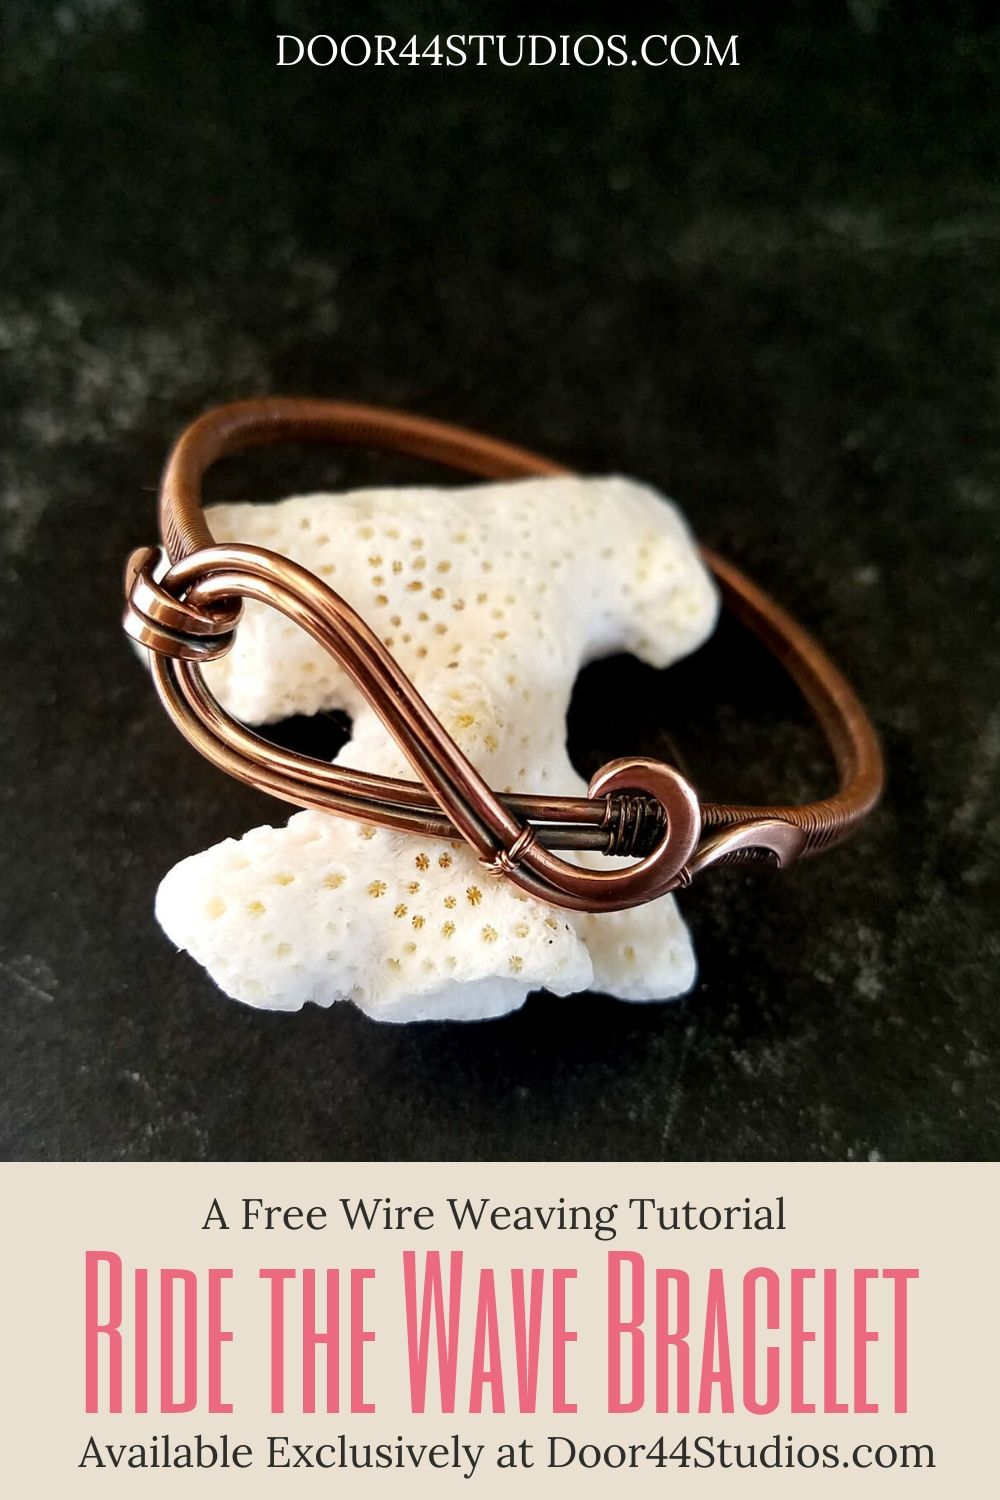 Learn to make the simple and elegant Ride the Wave bracelet with my latest free wire weaving tutorial! This project is a fun introduction to wire jewelry for beginners. And the simplicity of the design makes this bracelet just the sort of project that will help you build your wire weaving confidence!